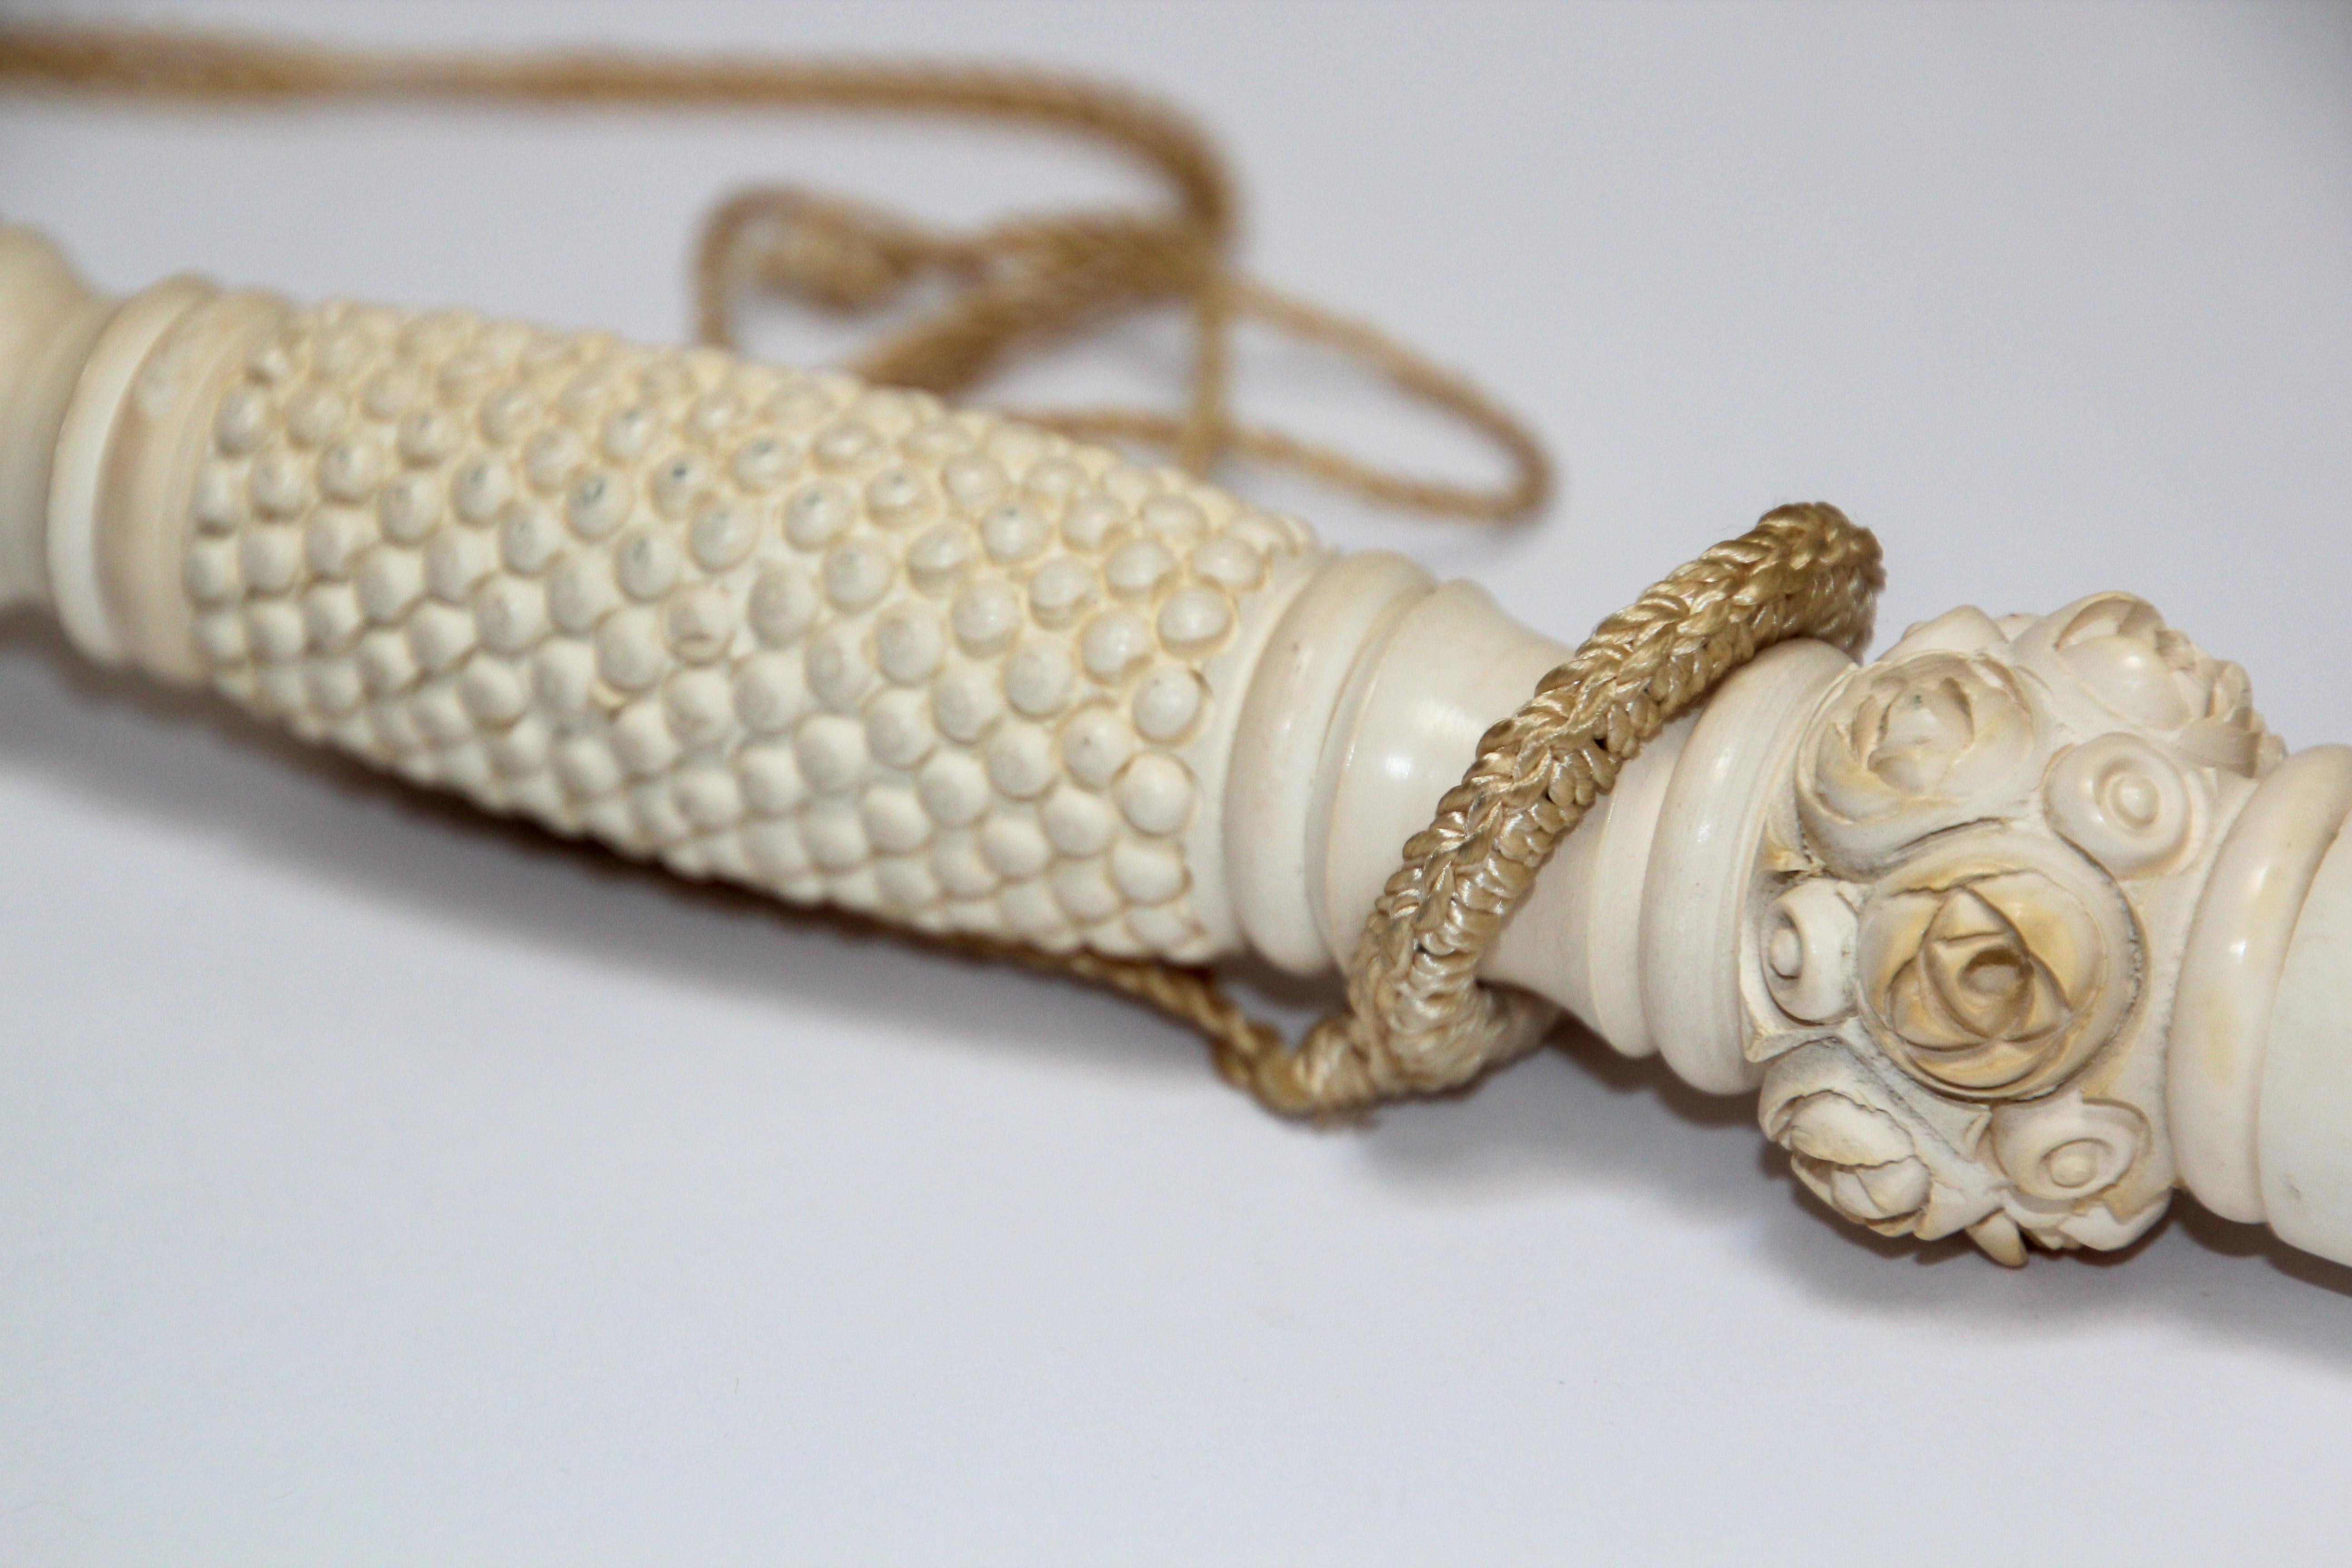 Carved Turkish Figural Meerschaum Moorish Pipe In Good Condition For Sale In North Hollywood, CA